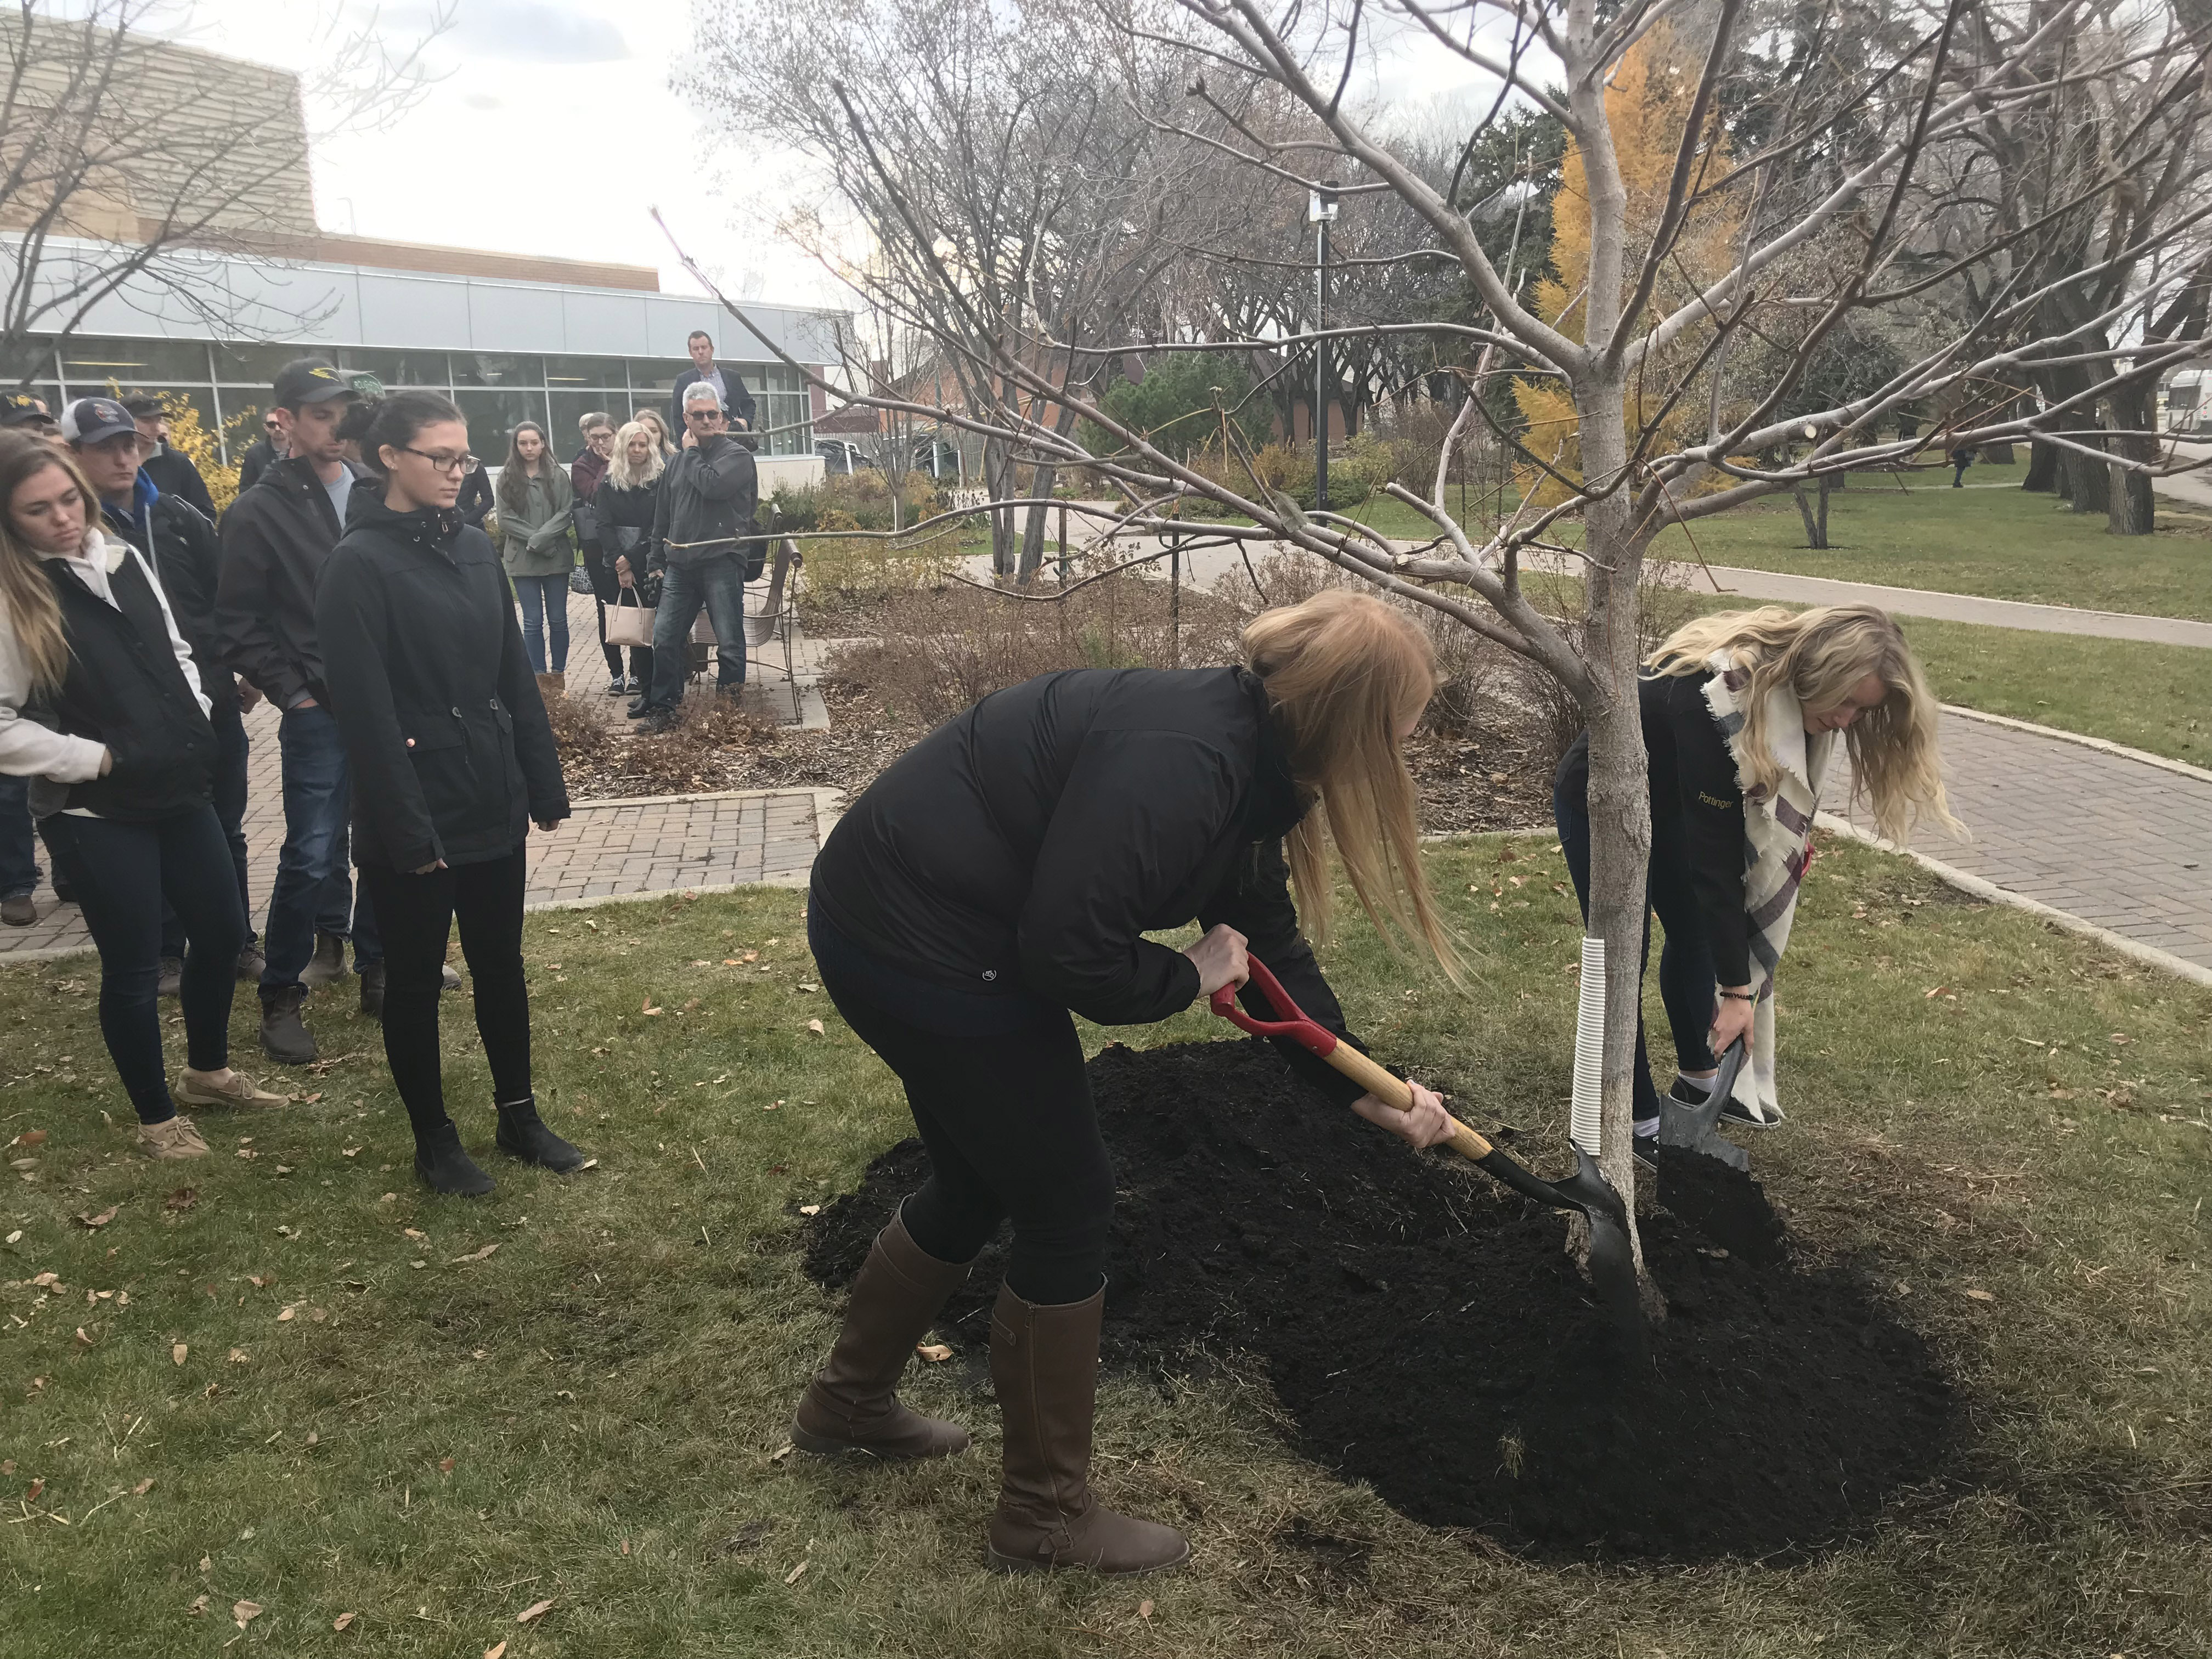 Students helped with the planting of the memorial tree.